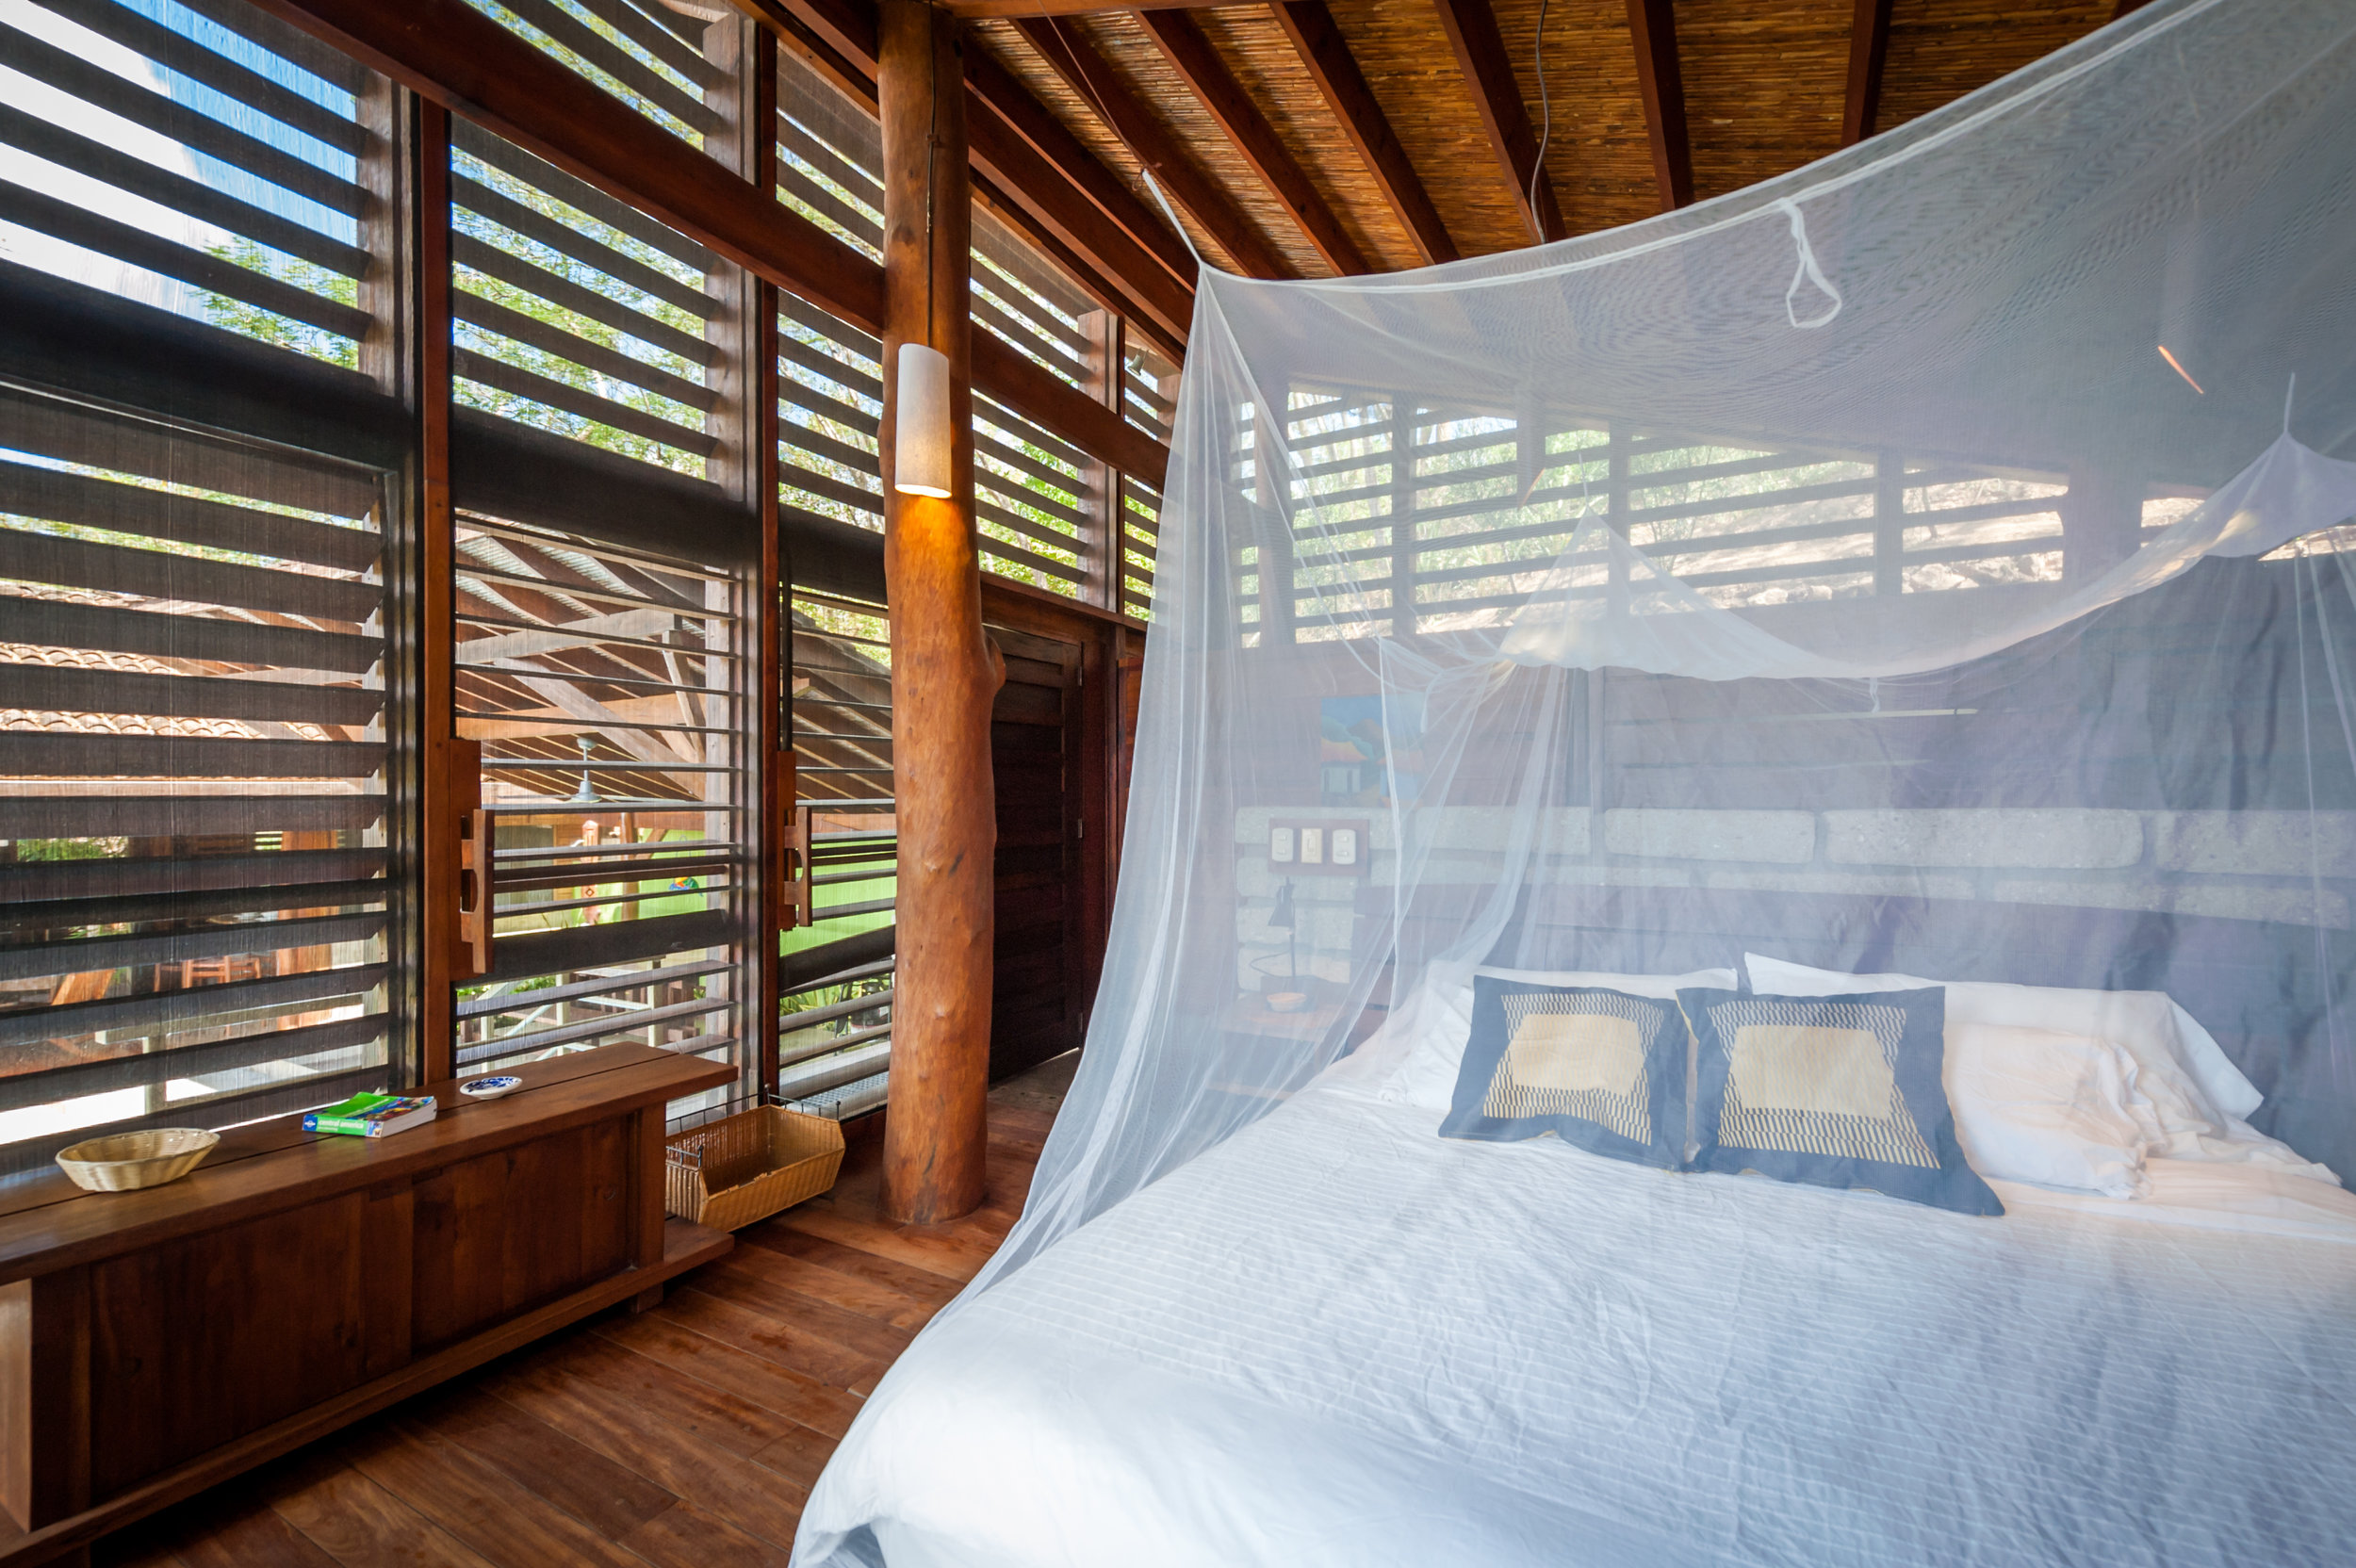 King sized bed with mosquito netting